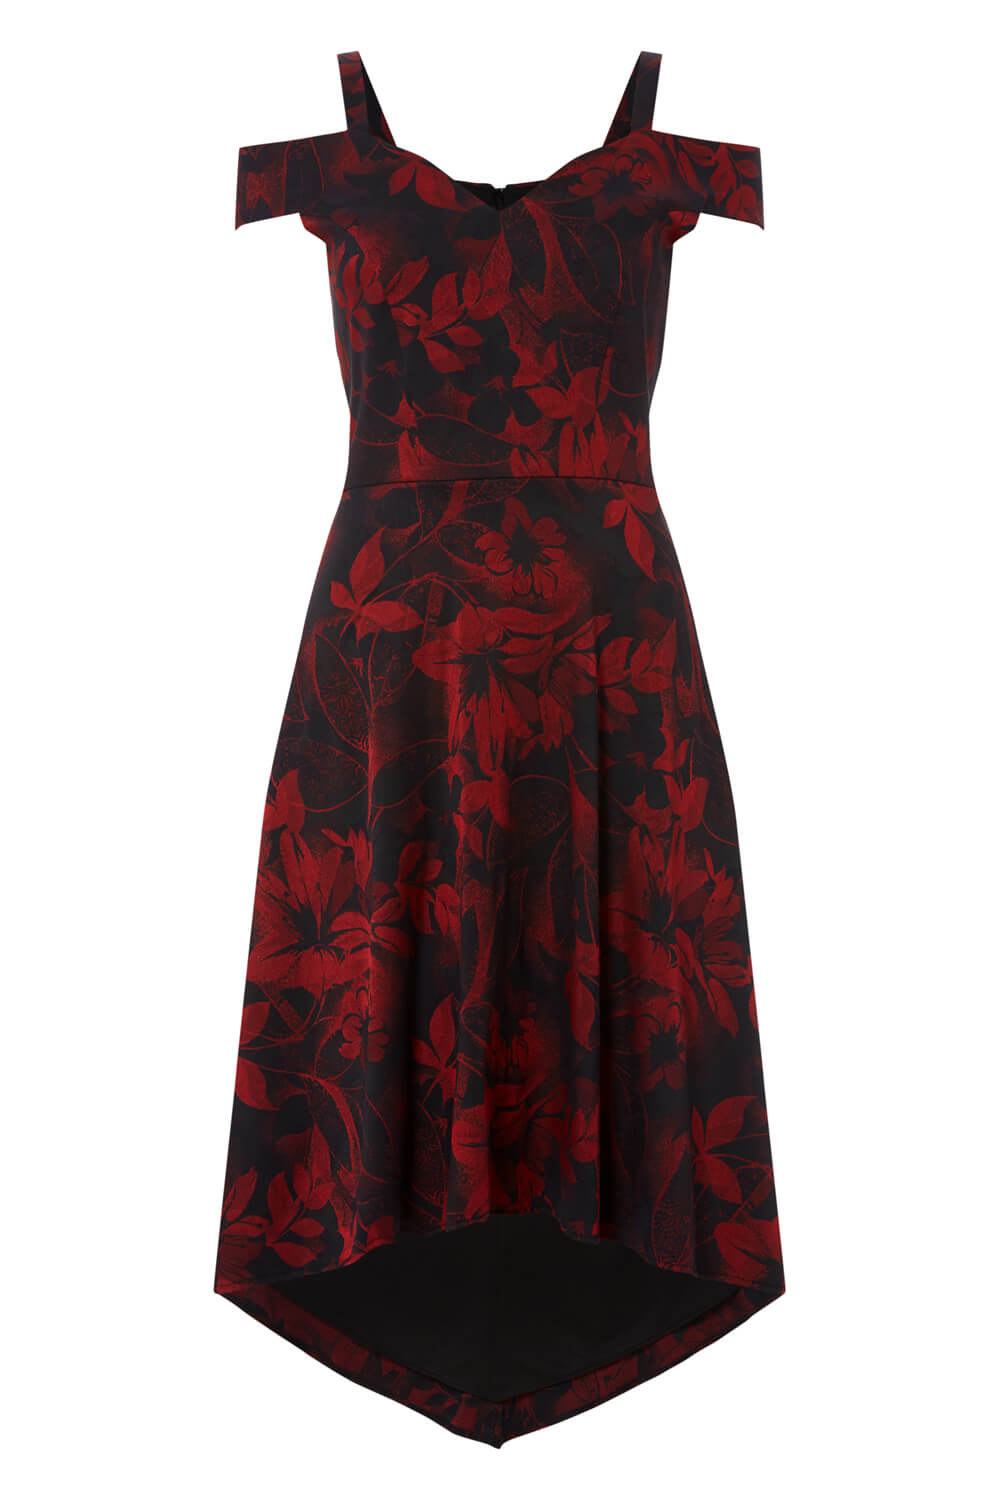 Black Floral Fit and Flare Dress, Image 4 of 4